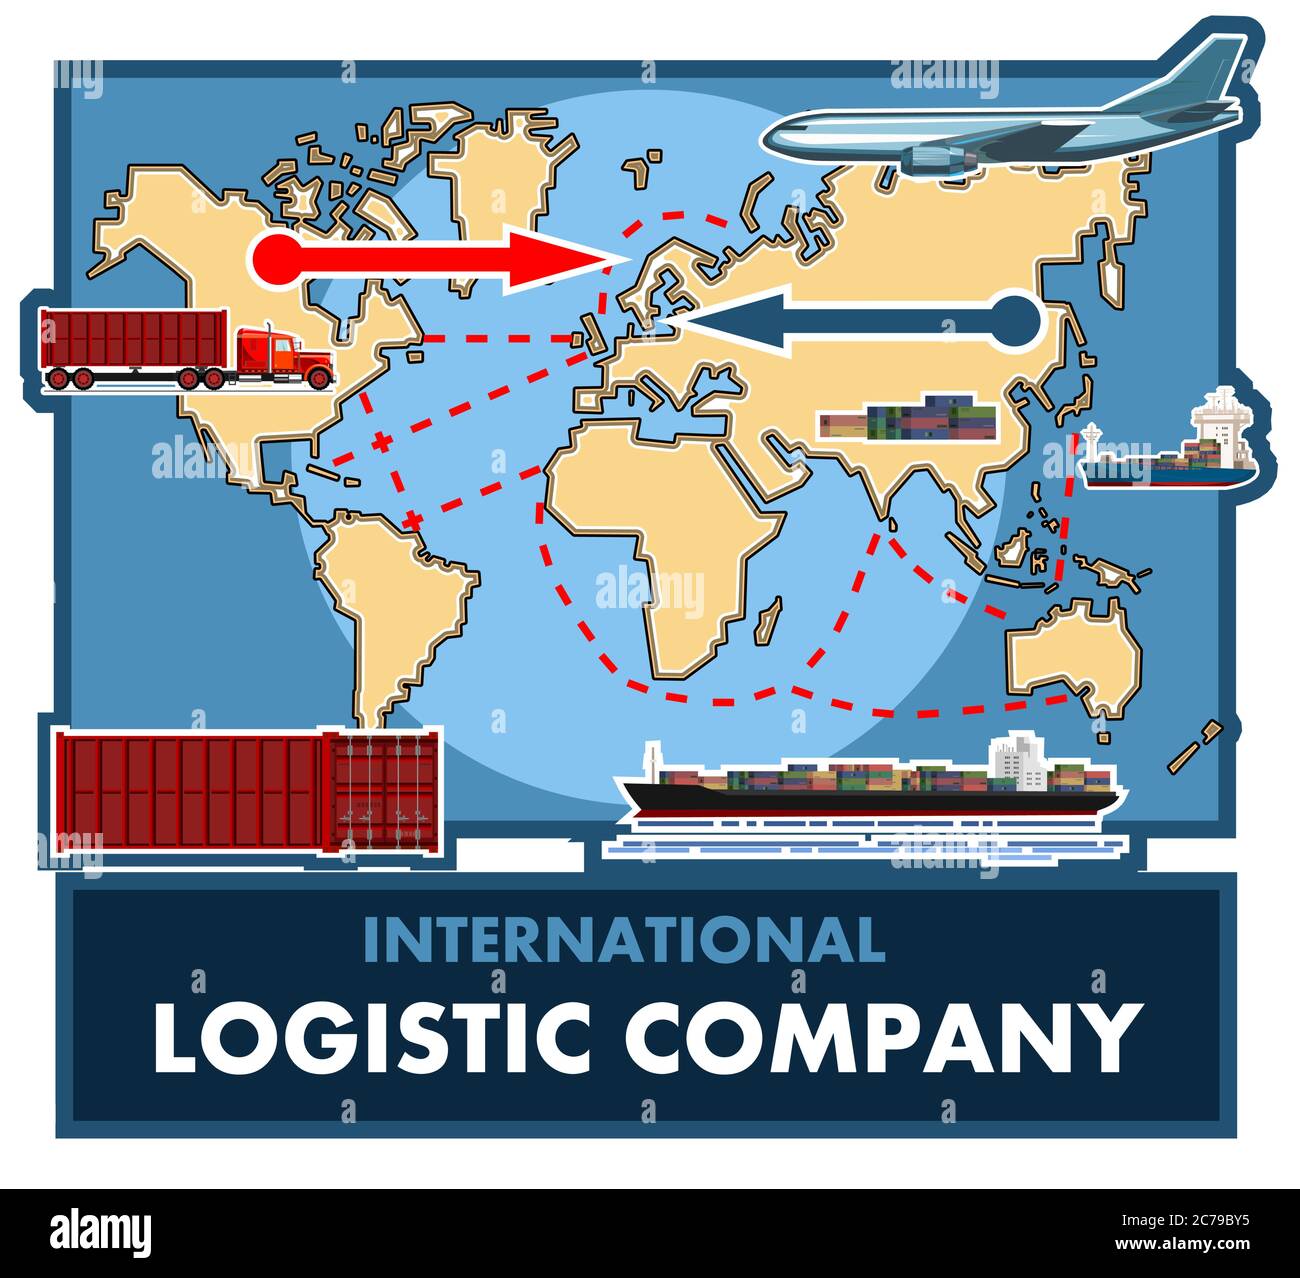 International logistics company. Shipment of goods by various means of transport anywhere in the world. Transcontinental transport: air, land, ocean Stock Vector